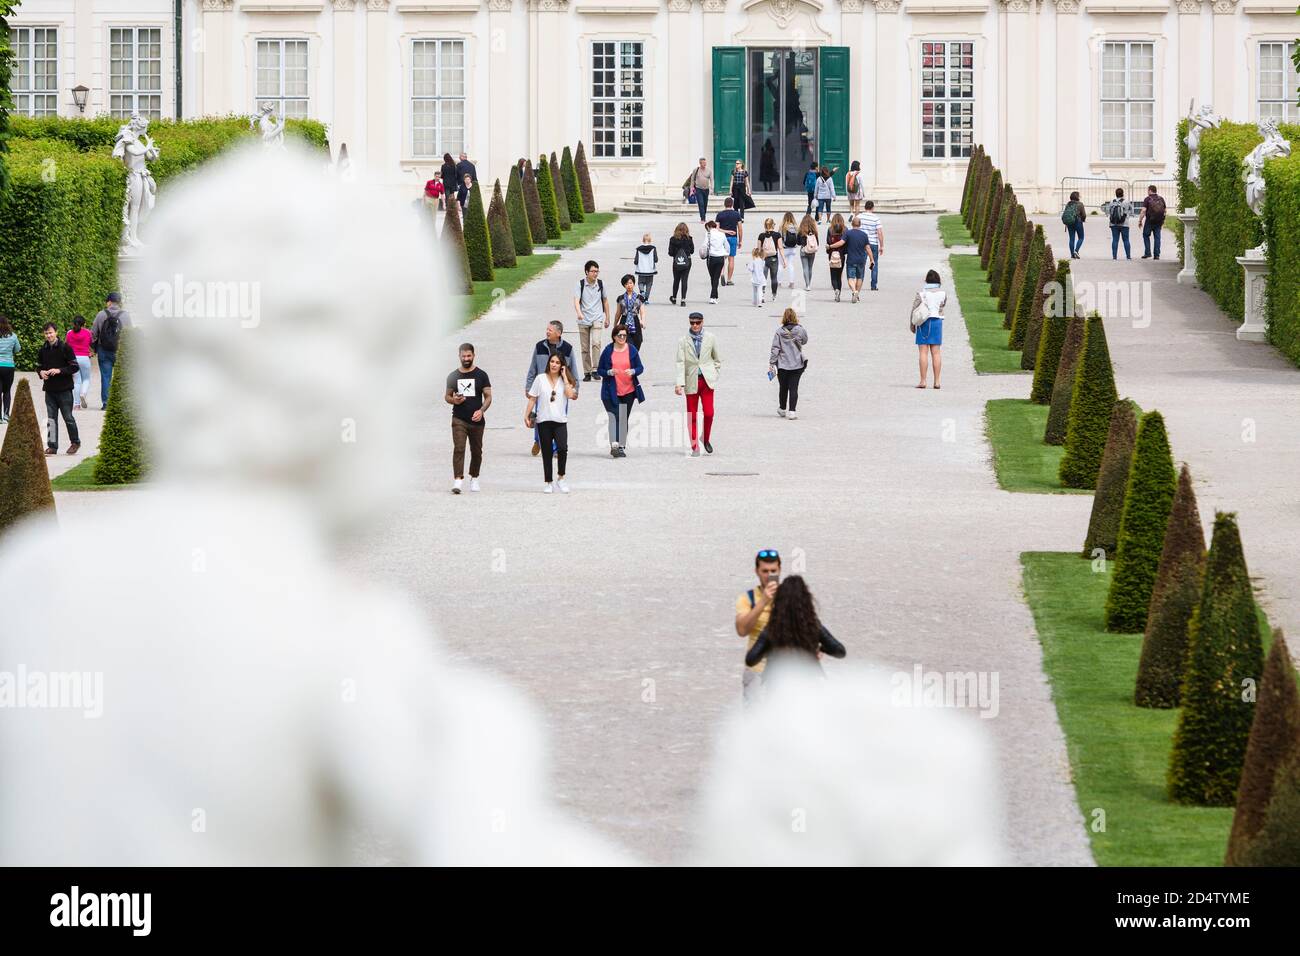 VIENNA - MAY 5: Over the shoulder view of a statue to the Lower Belvedere in the Belvedere Palace park of Vienna, Austria with some tourists in the ga Stock Photo